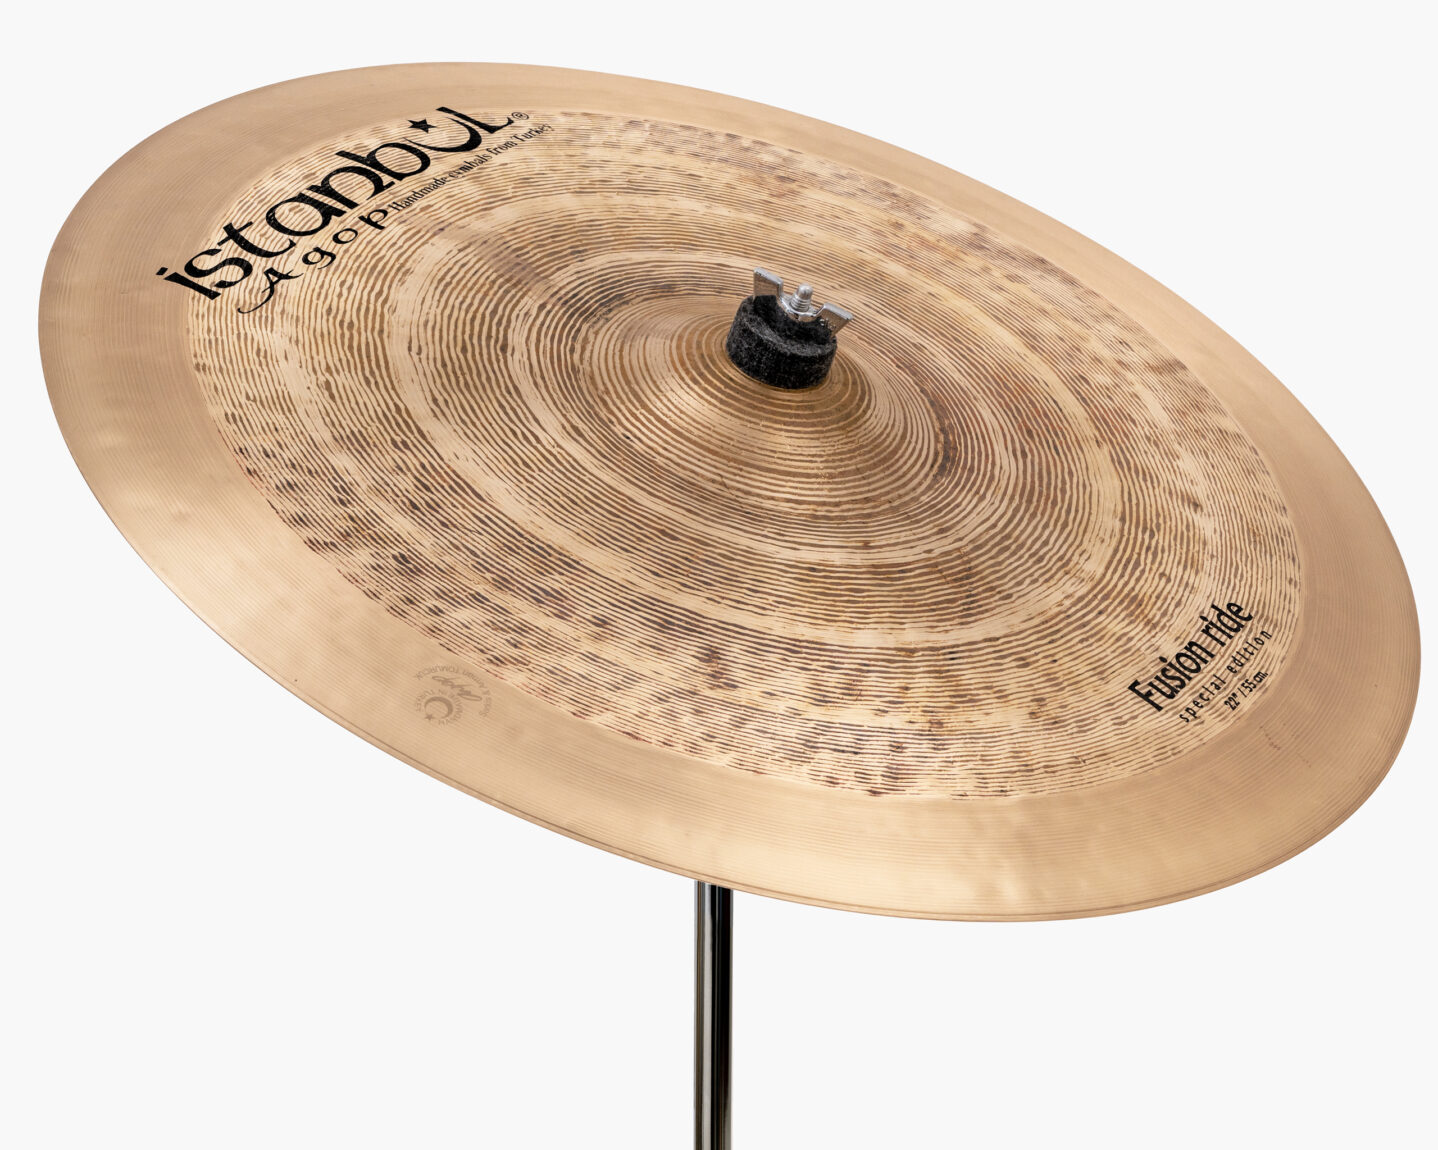 Istanbul Agop Special Edition Fusion Ride